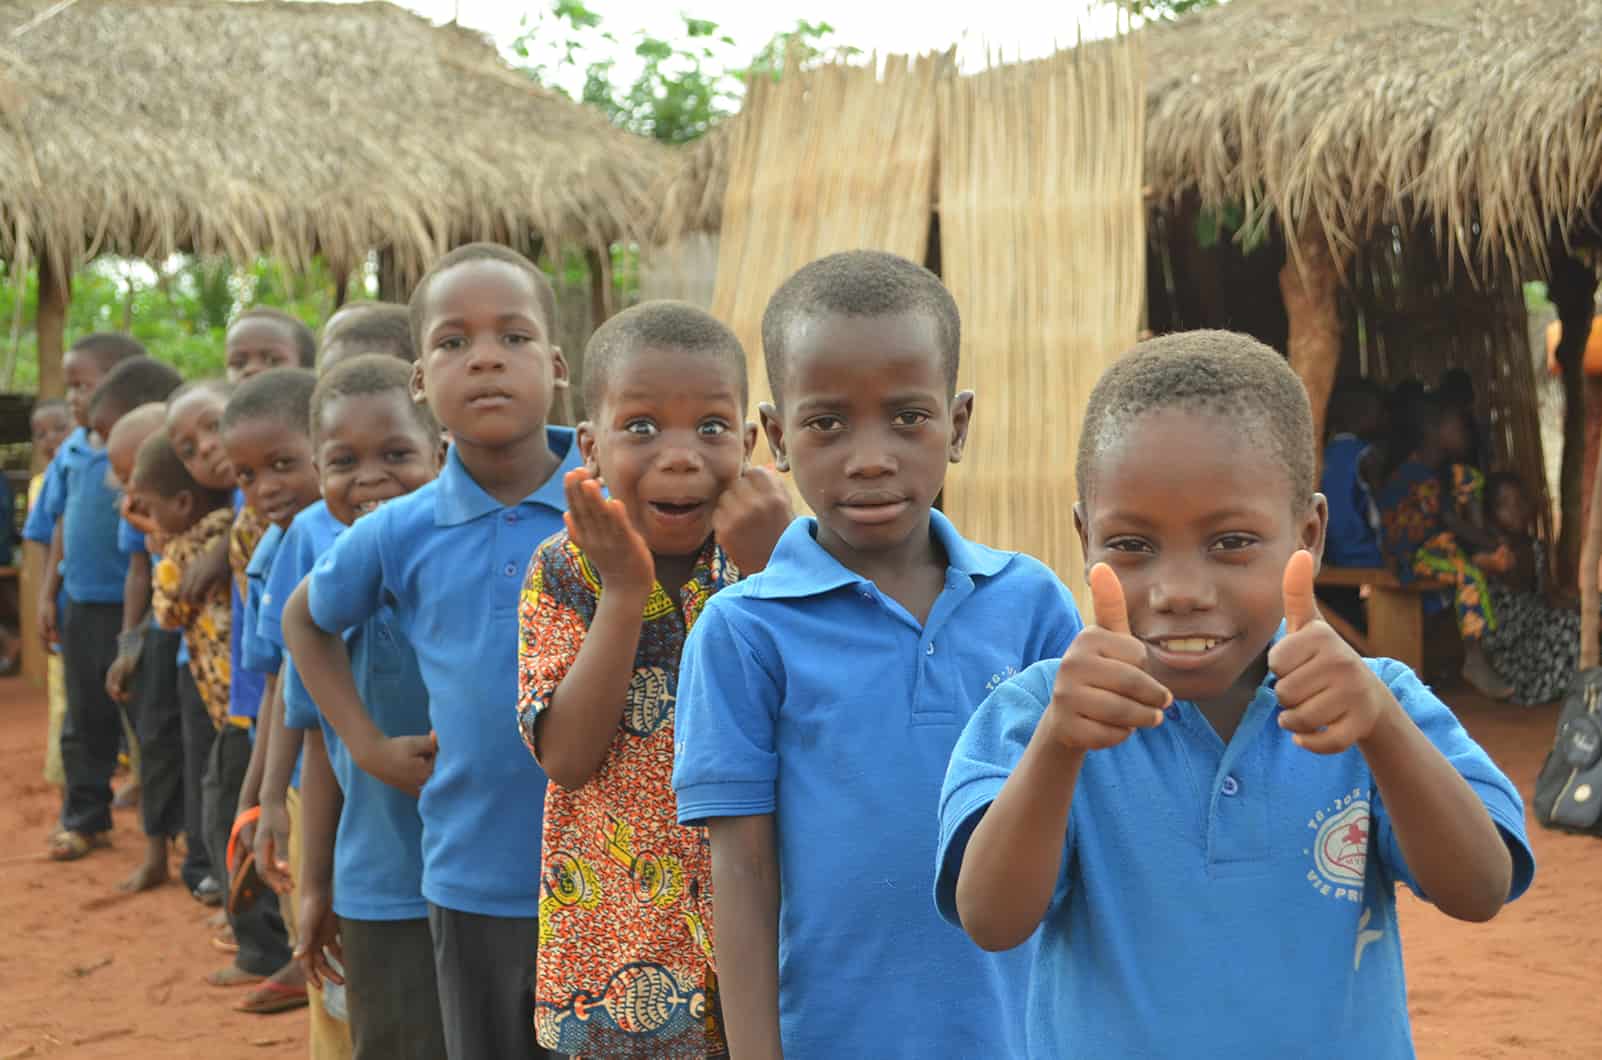 A line of kids in togo with one making a funny face